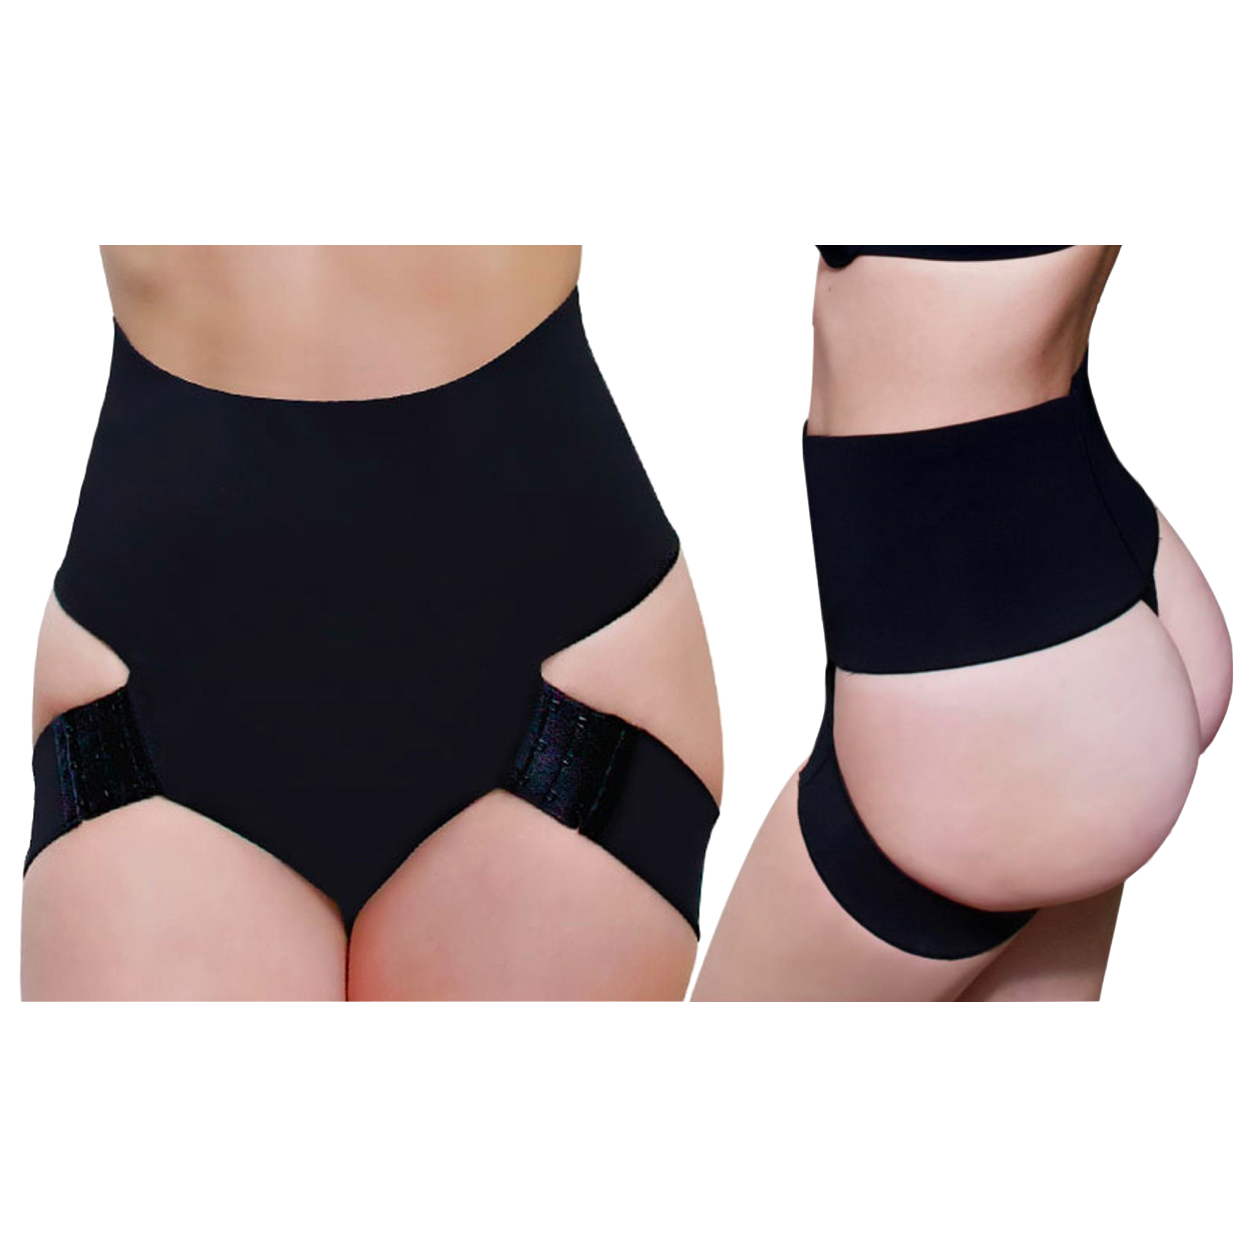 Adjustable Butt Booster Control Shaper In Regular And Plus Sizes - Black, M